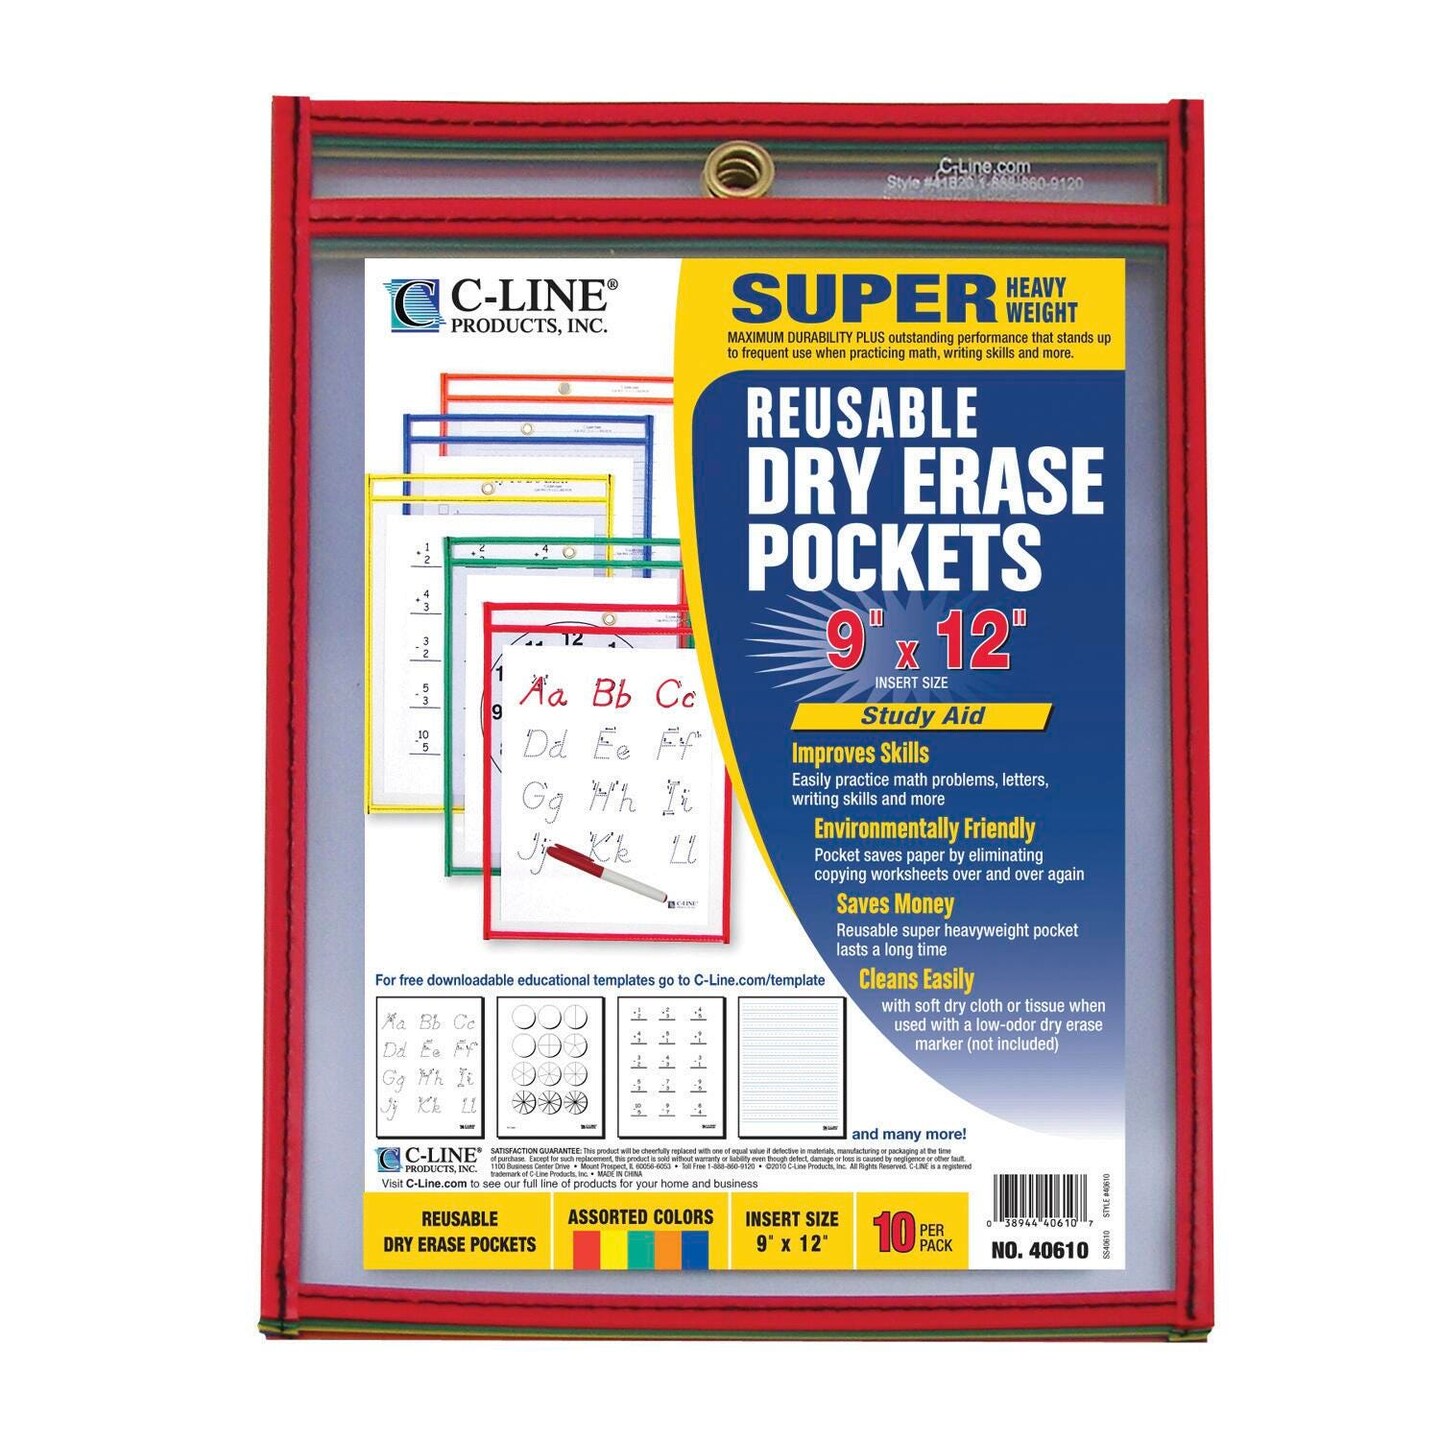 C-Line Dry Erase Reusable Pockets, Assorted Colors, 9 x 12 Inches, Pack of 10